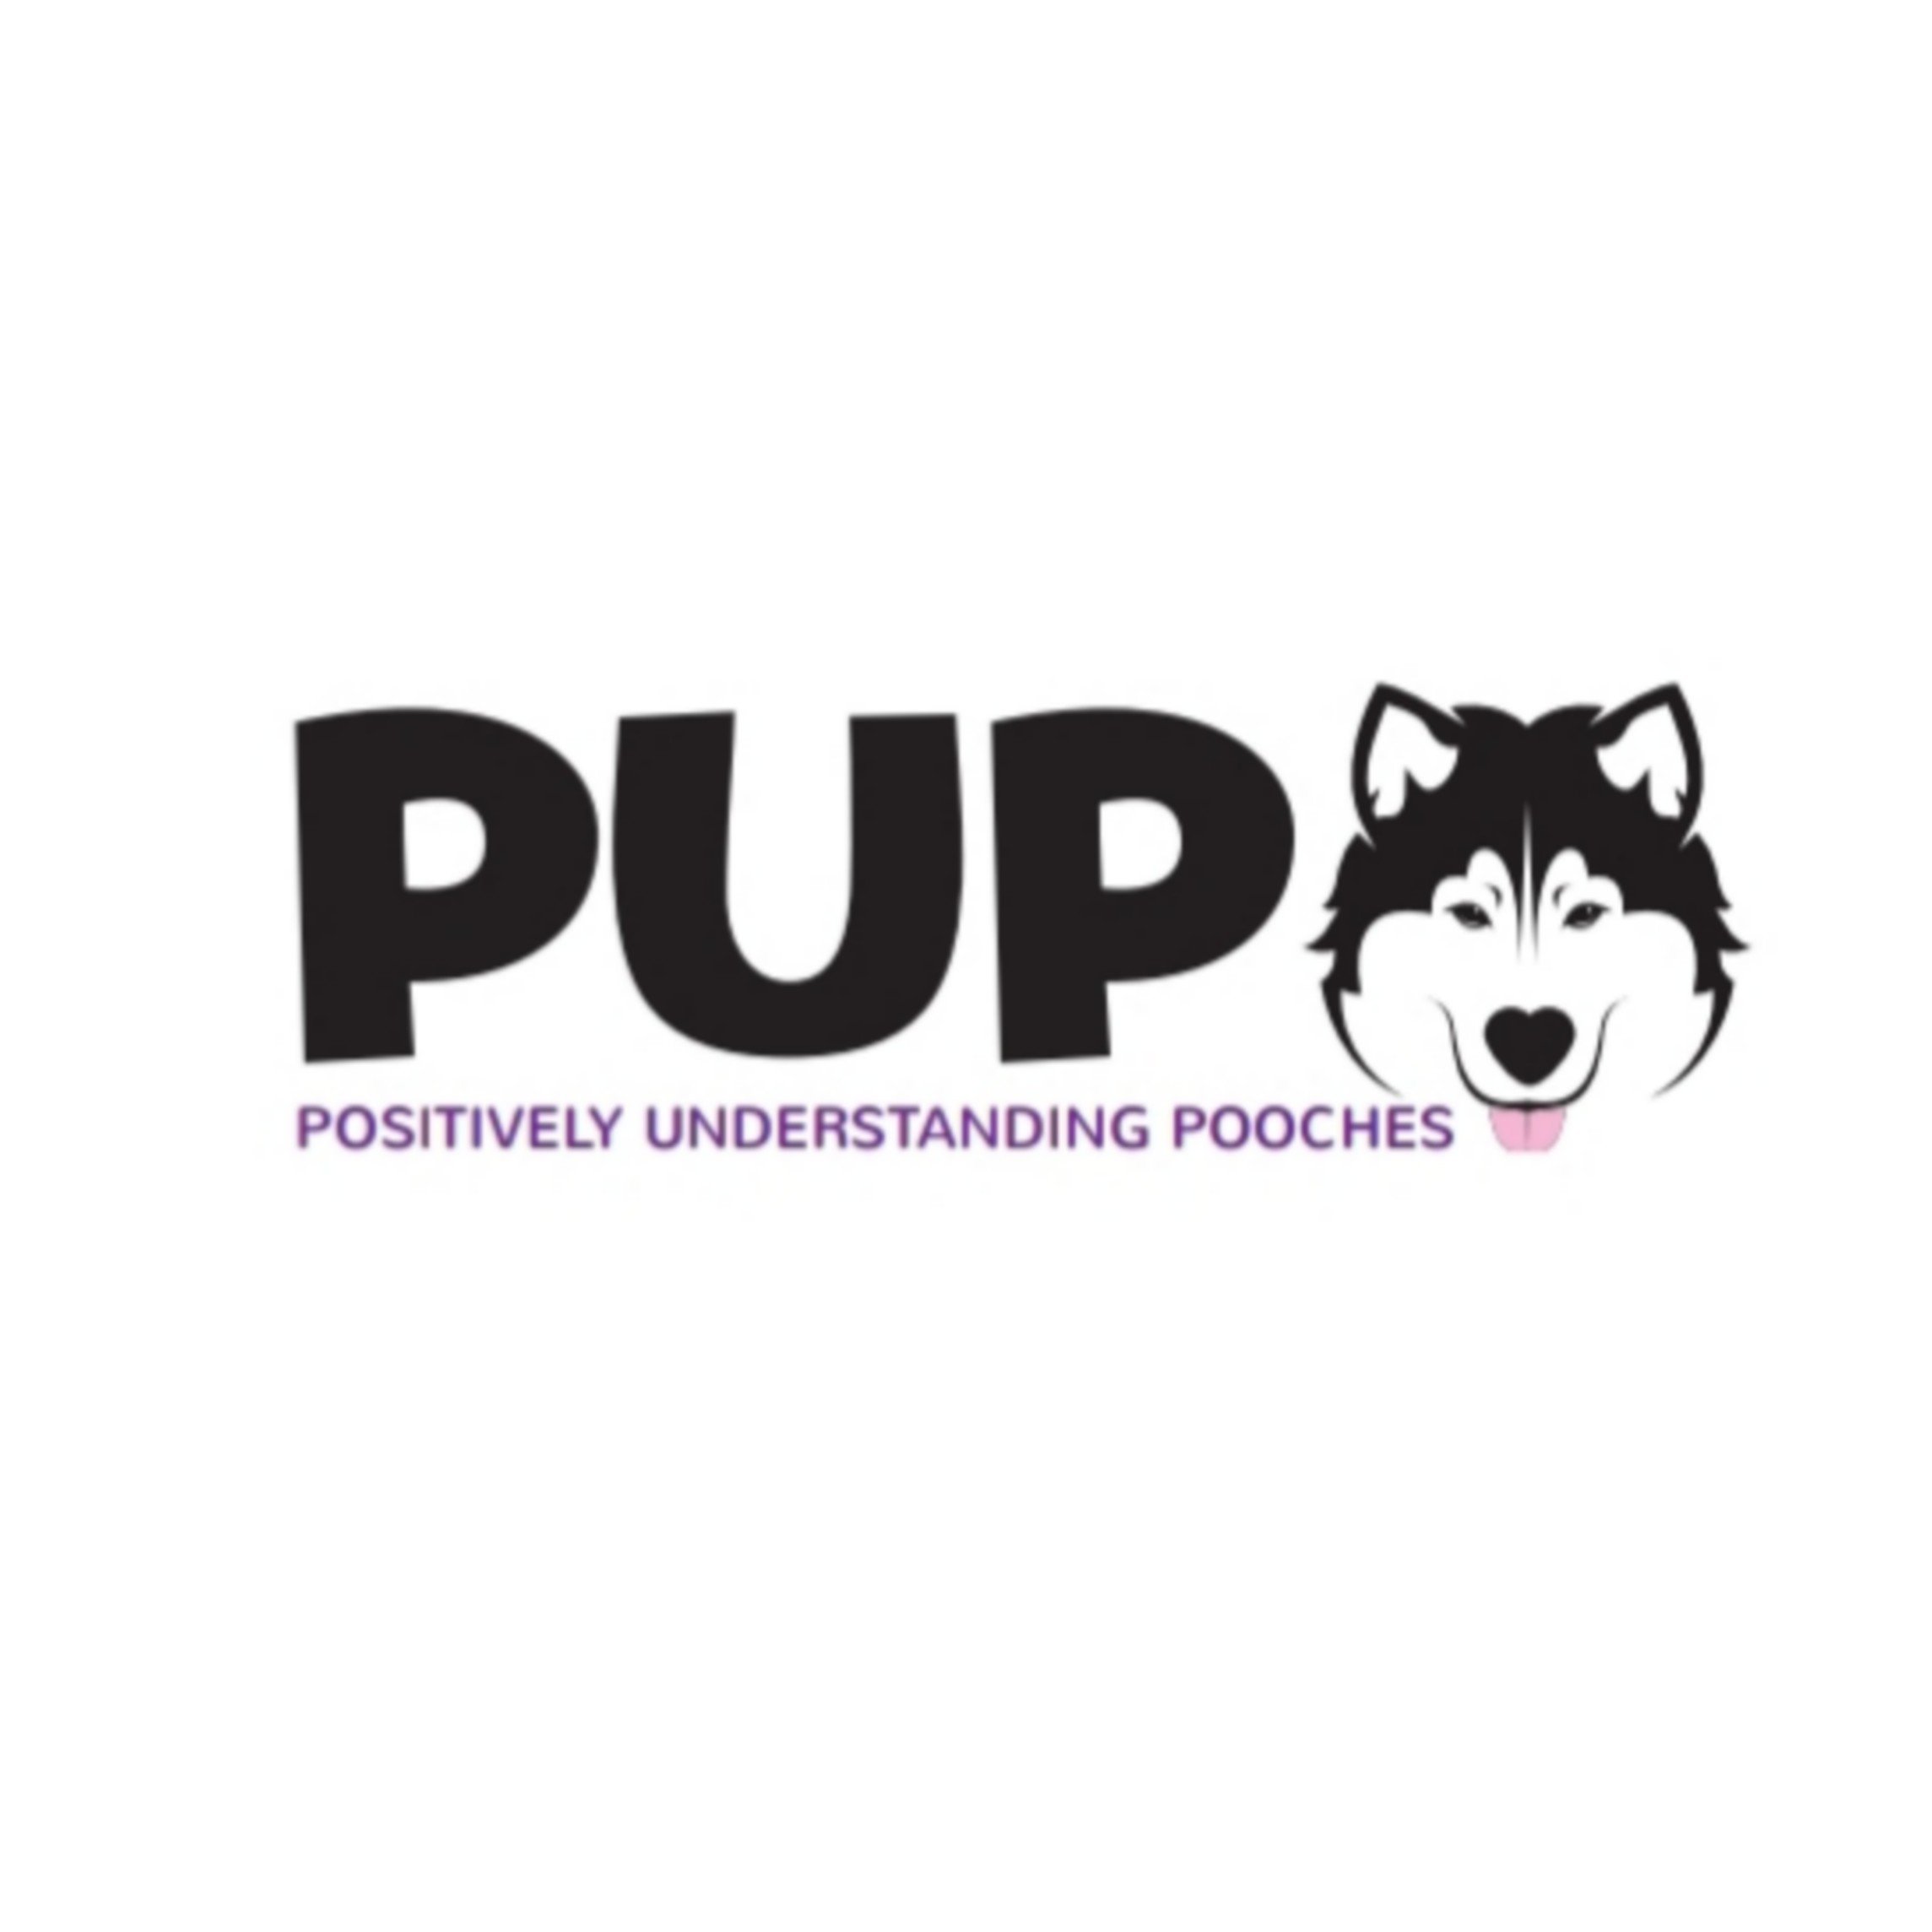 Pup - Positively Understanding Pooches